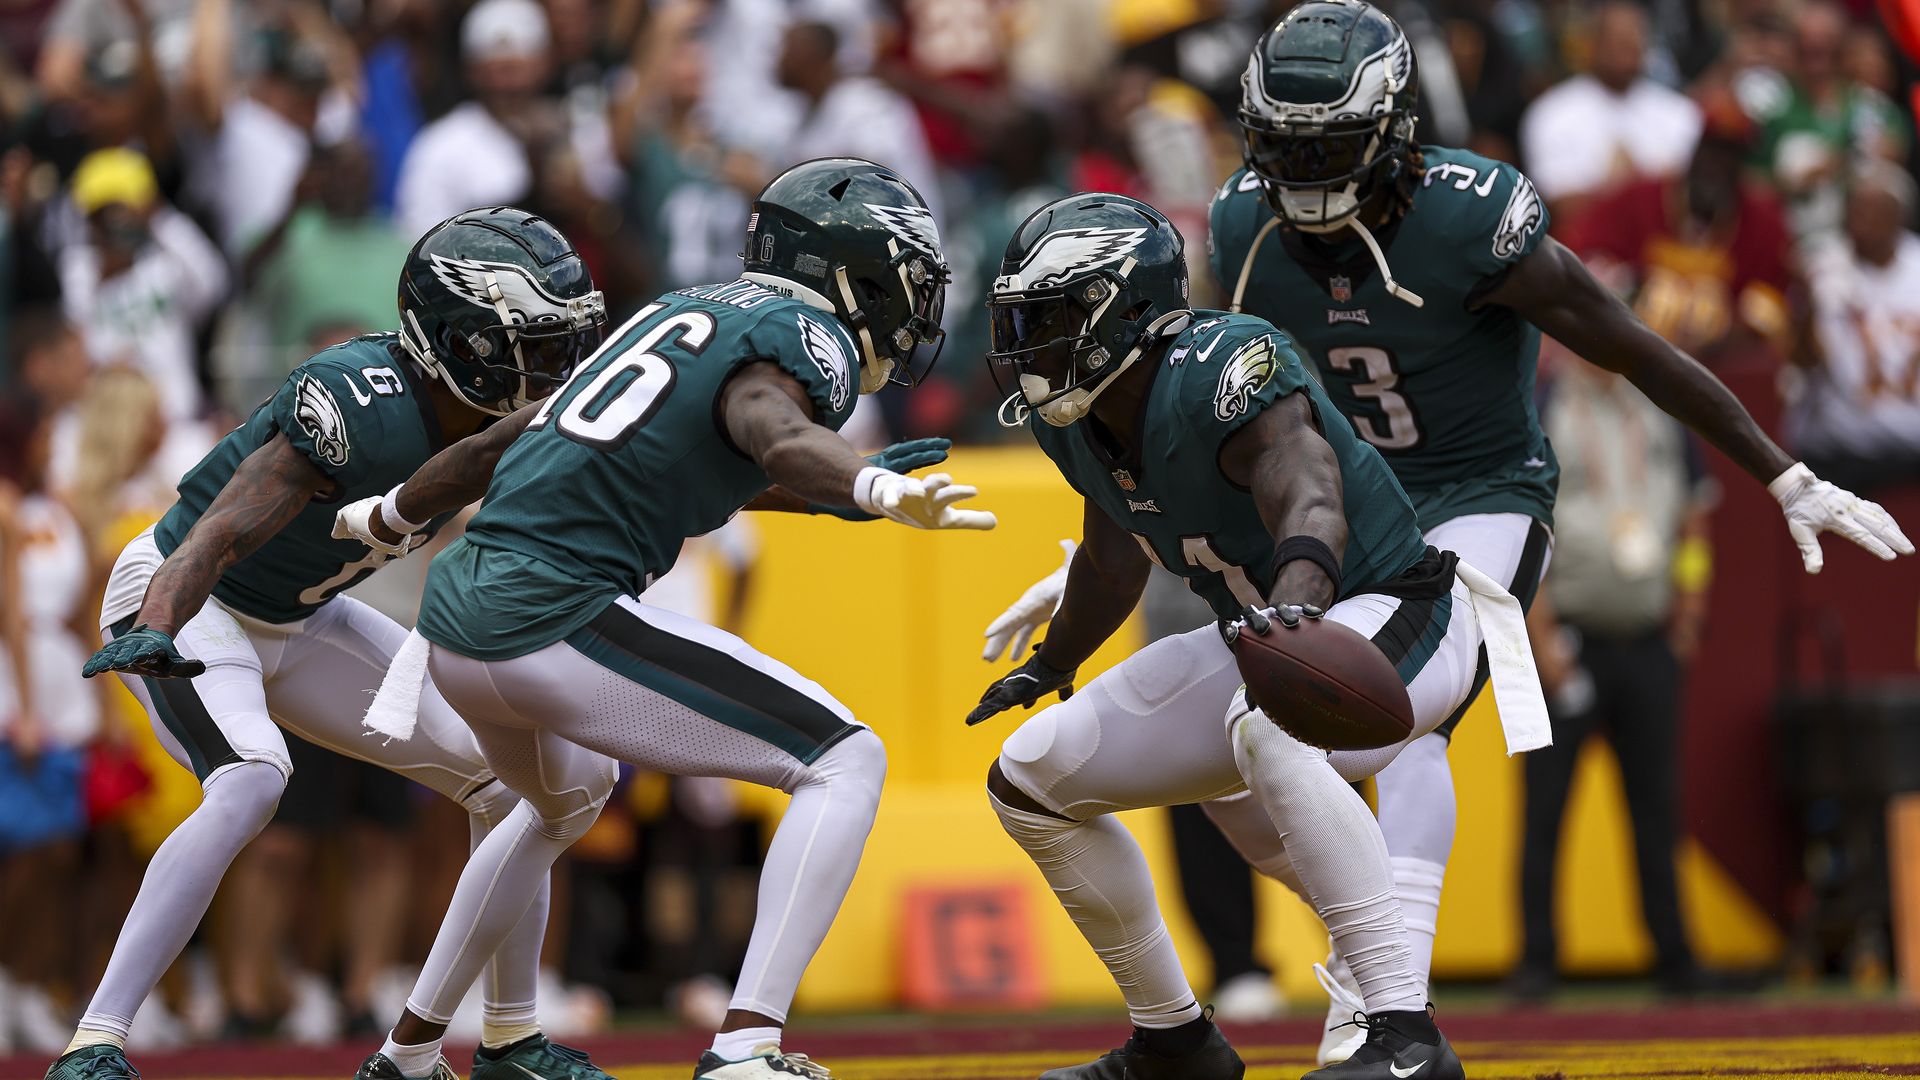 A group of Eagles player celebrate in the end zone.